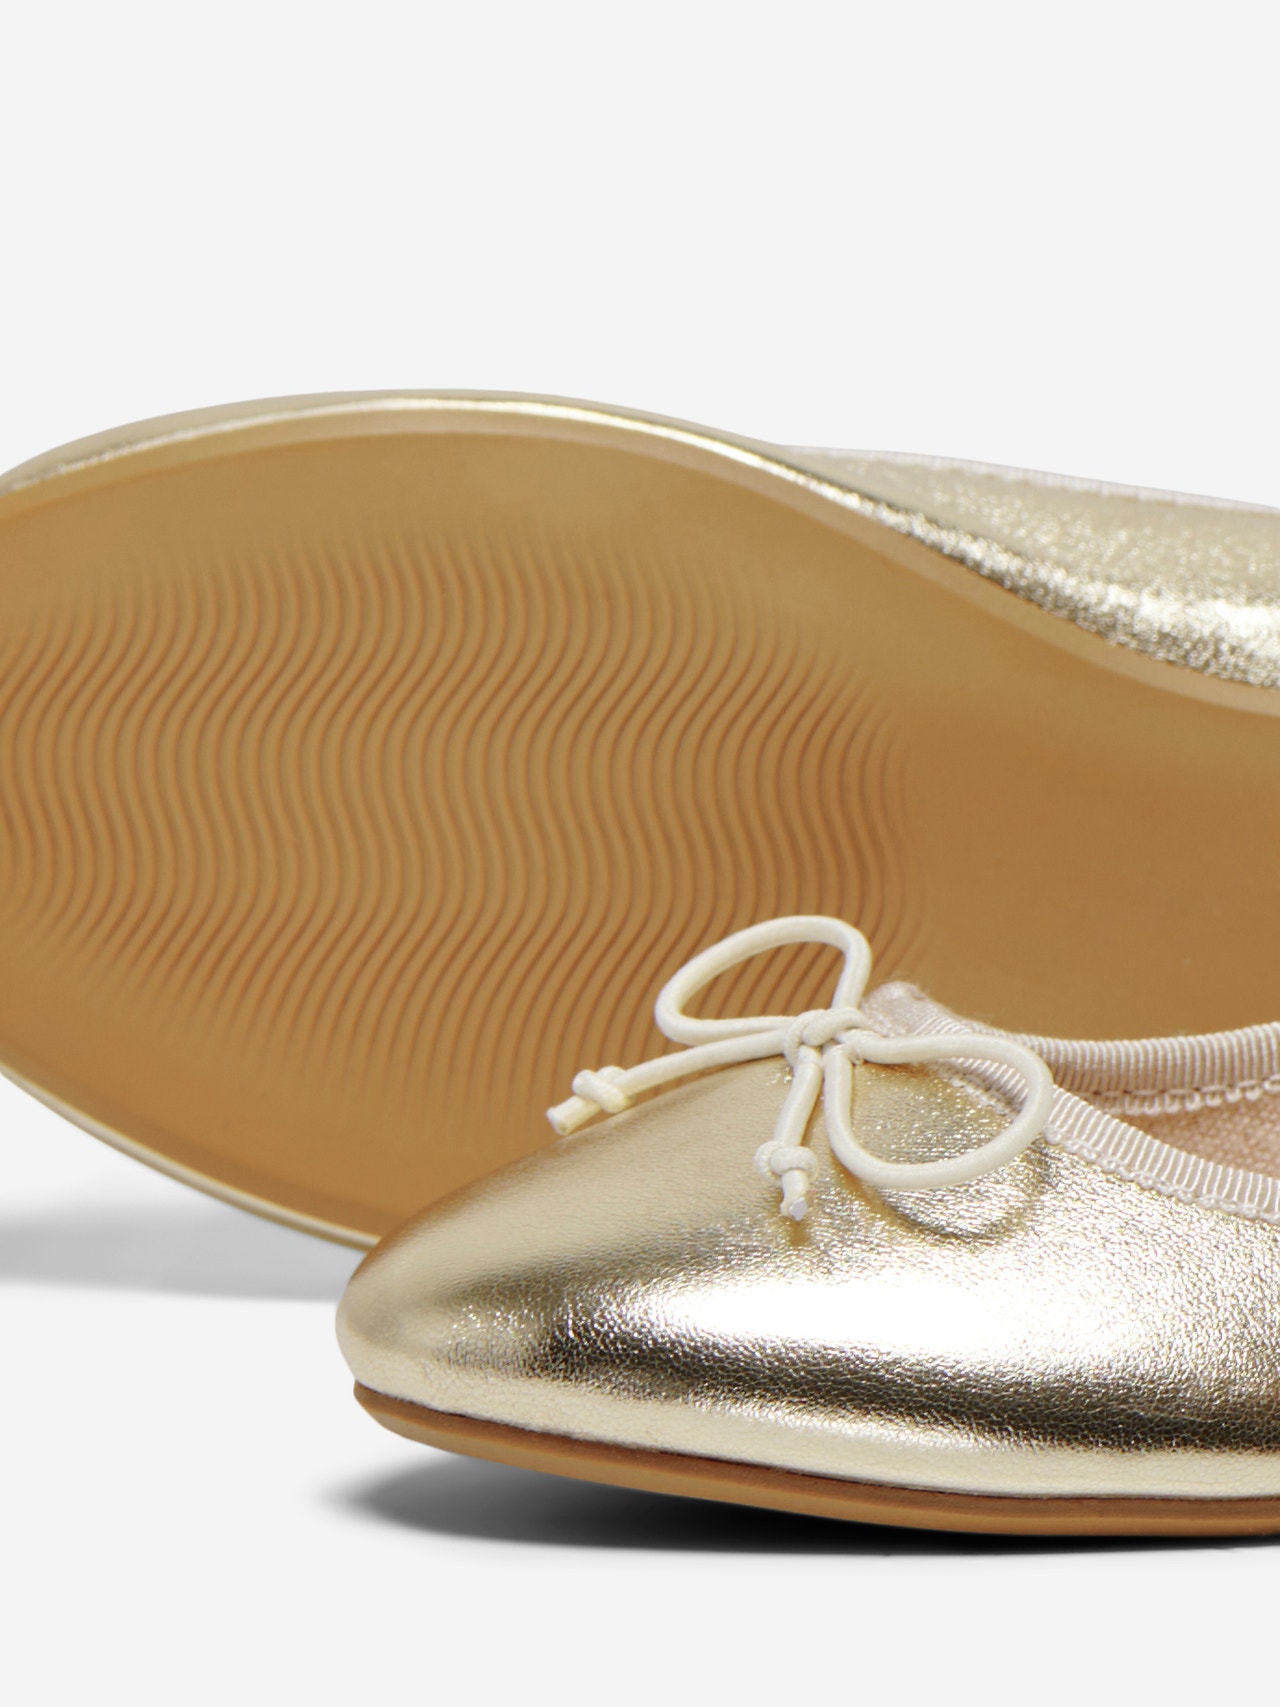 ONLY Round toe Ballerina -Gold Colour - 15304513